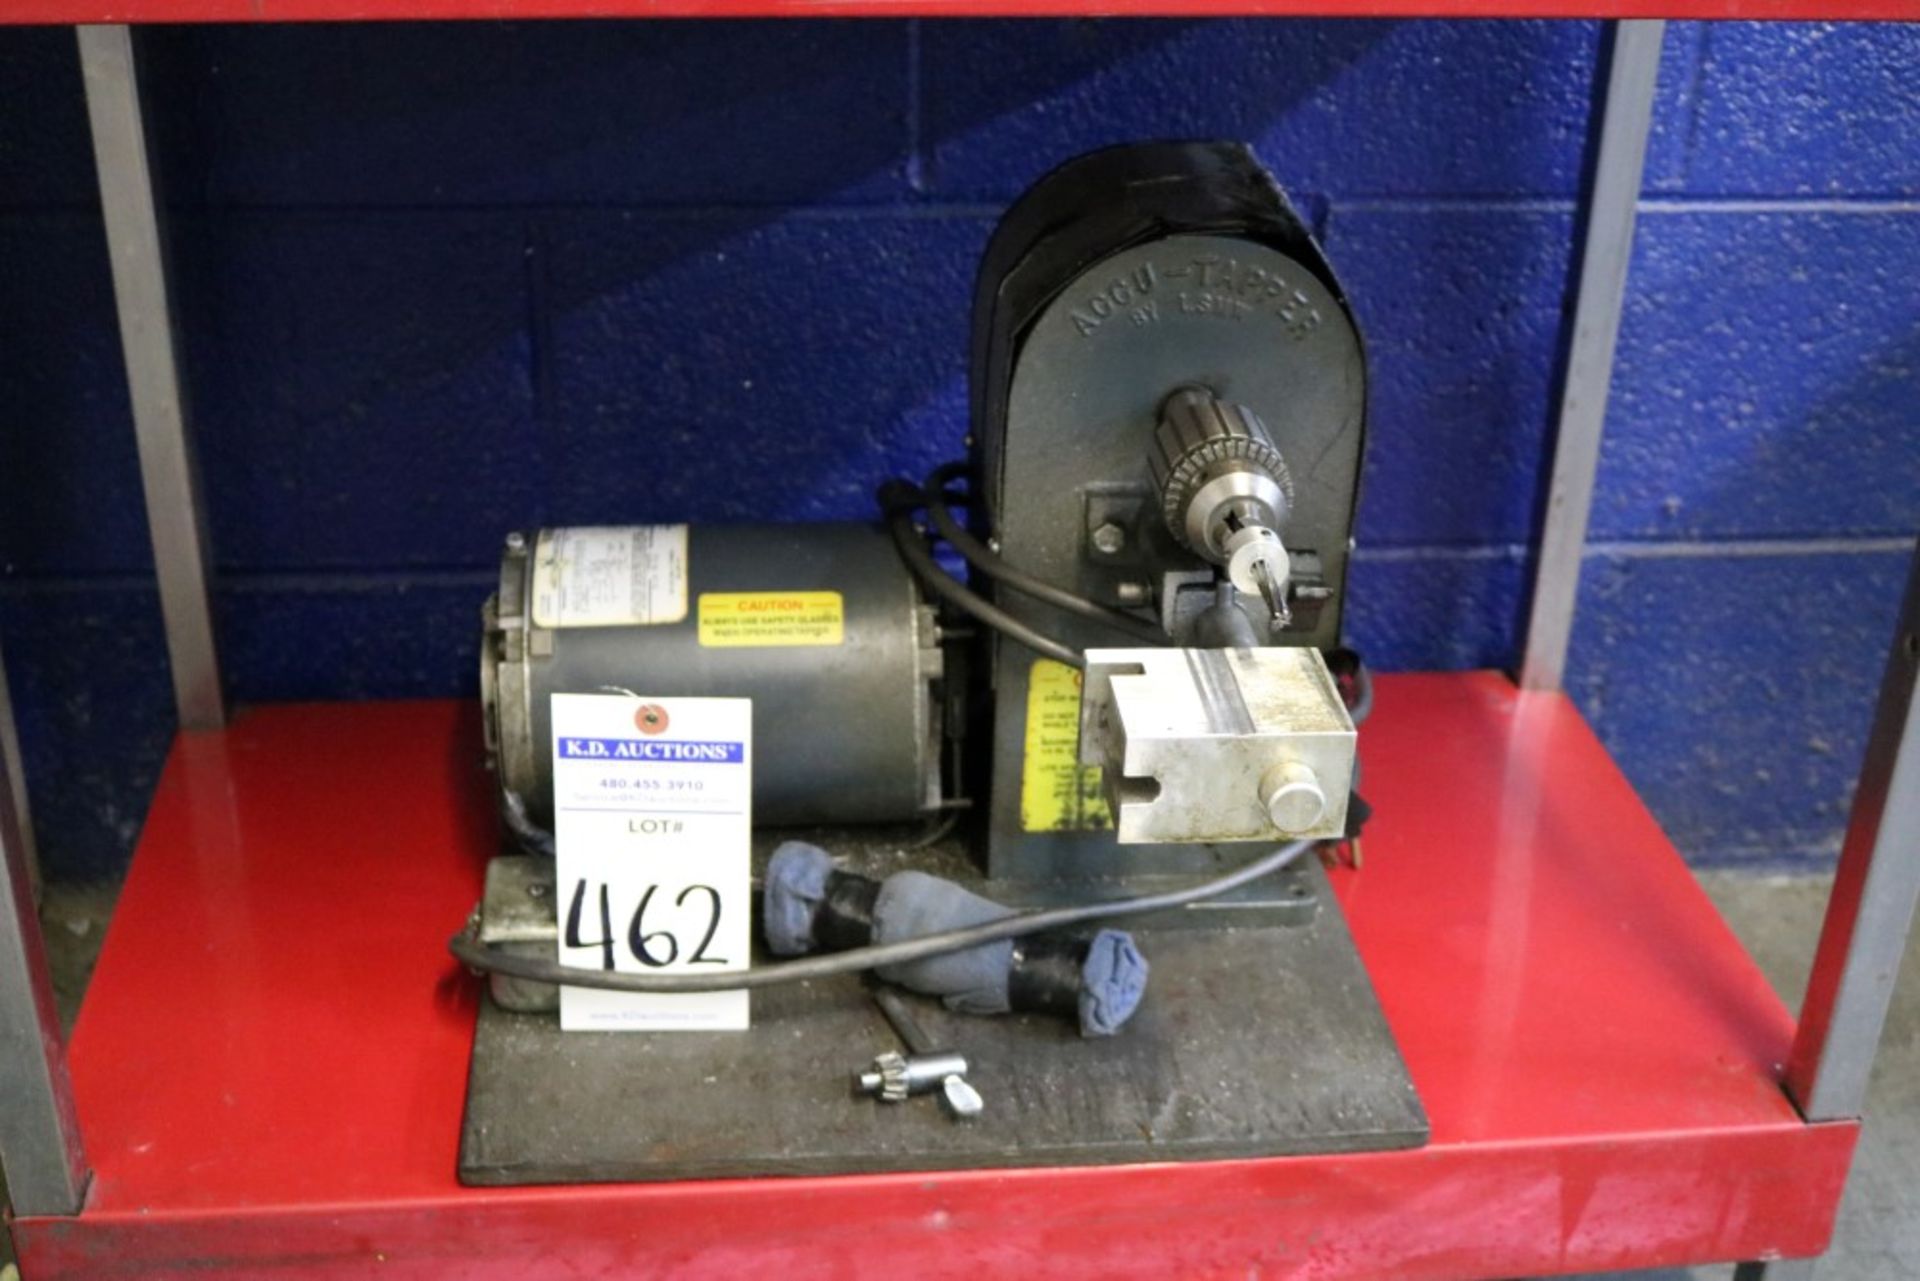 13mm Drill Press Model RDM-1301B, 5 Speed, 1/4 HP and Accu-Tapper By LSMW with Jacob Chuck - Image 9 of 9